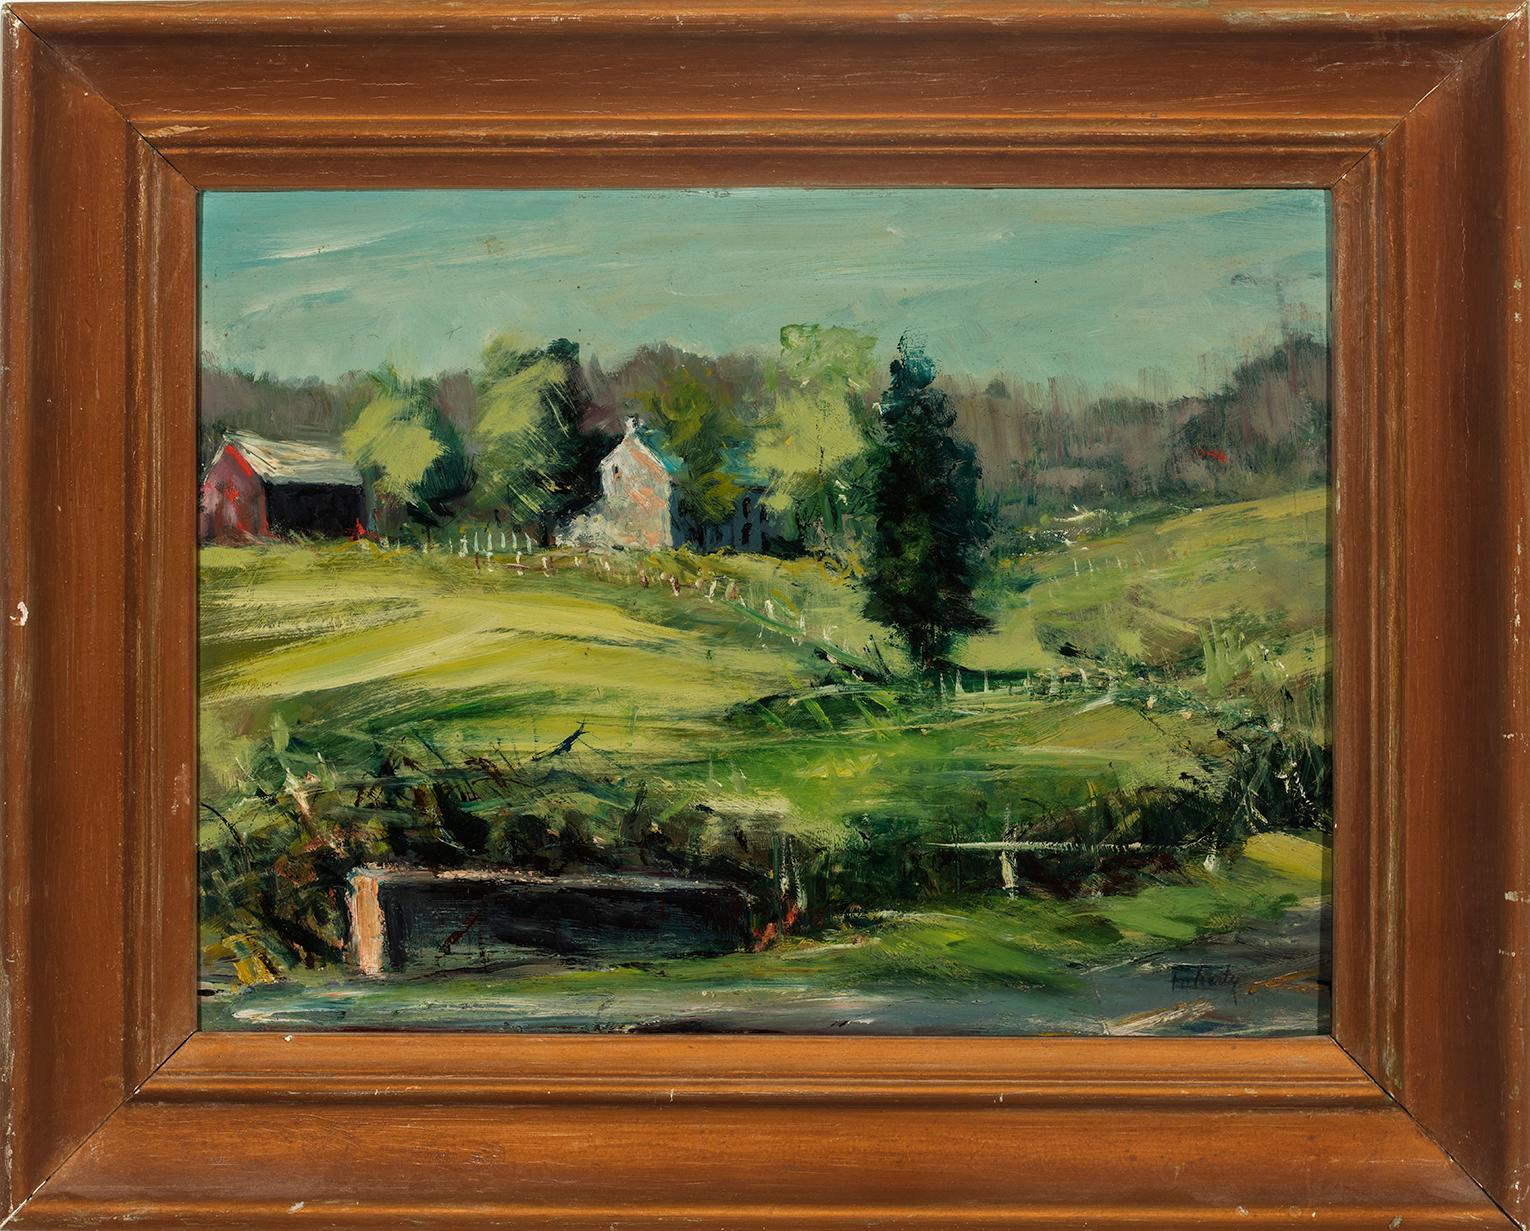 Evelyn Faherty Landscape Painting - "Solebury Hills"